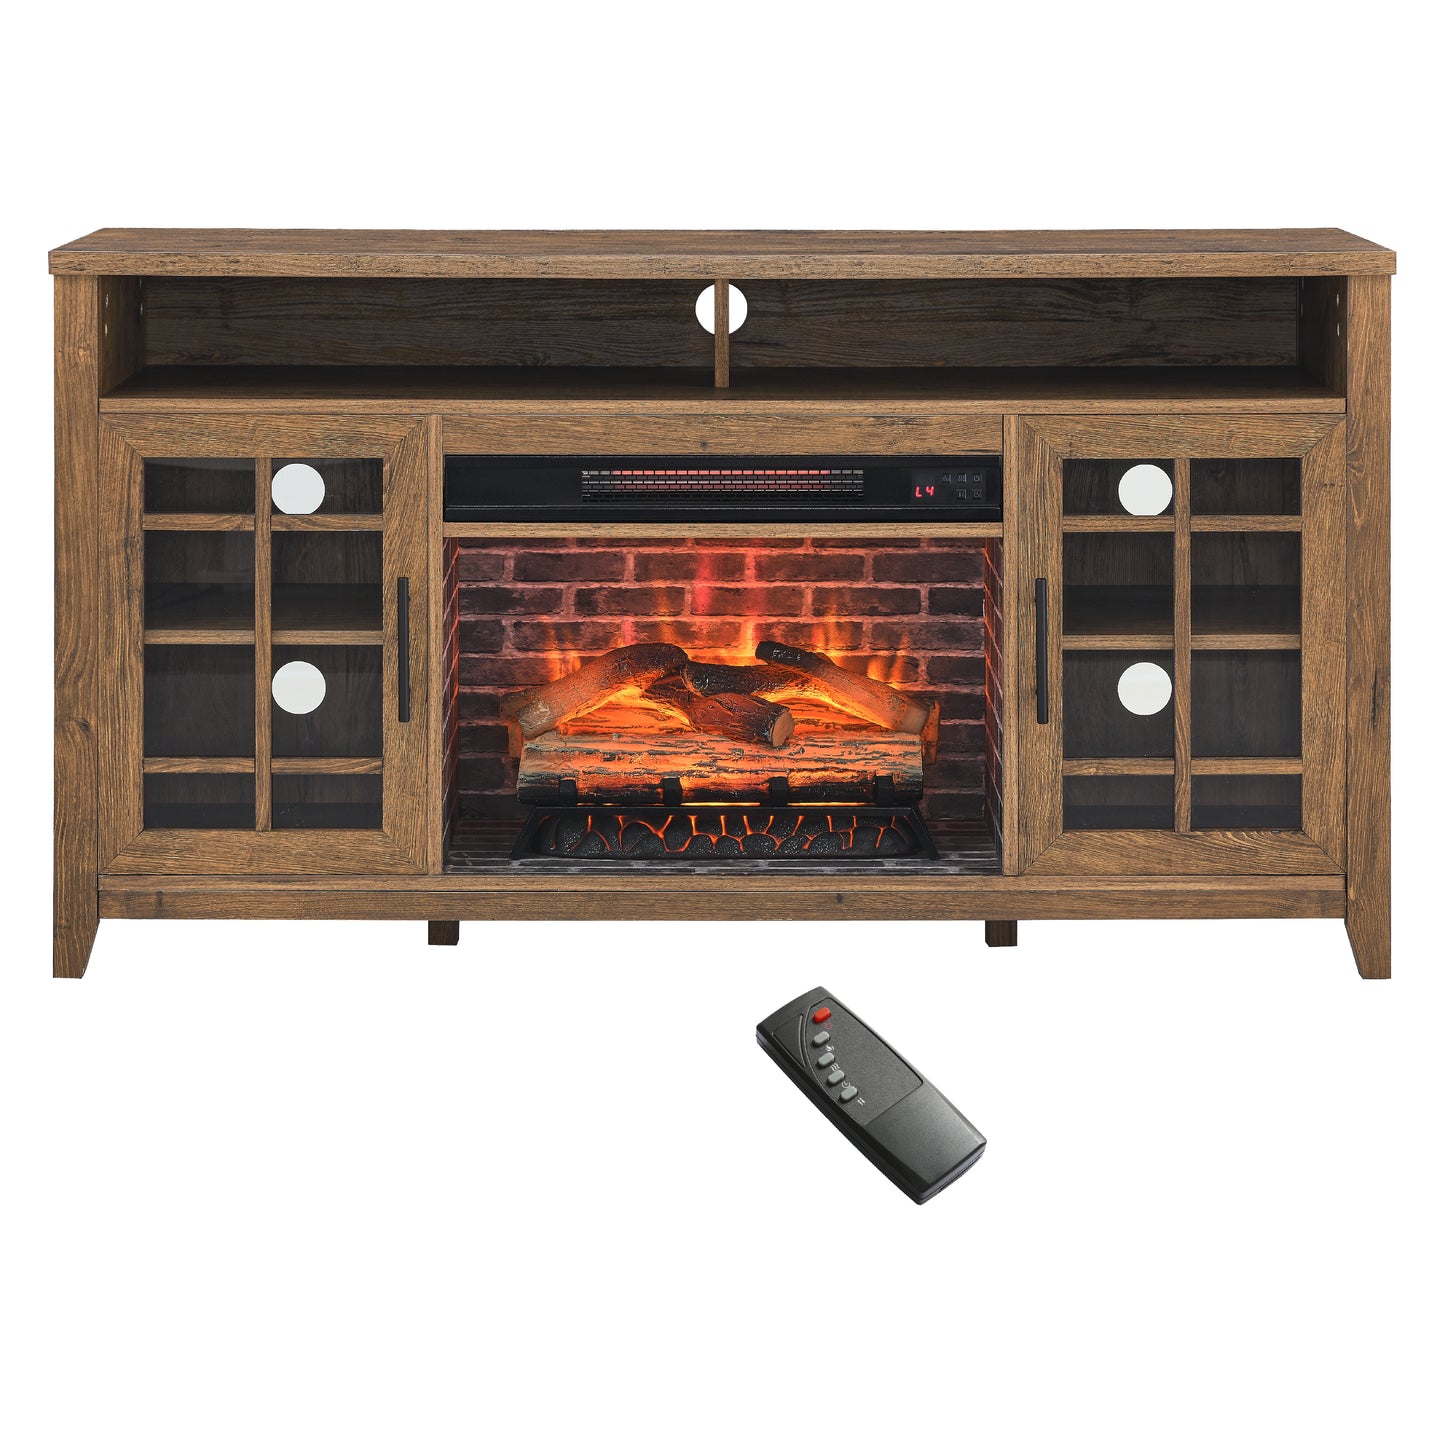 55 inch TV Media Stand with Electric Fireplace - Reclaimed Barnwood Color